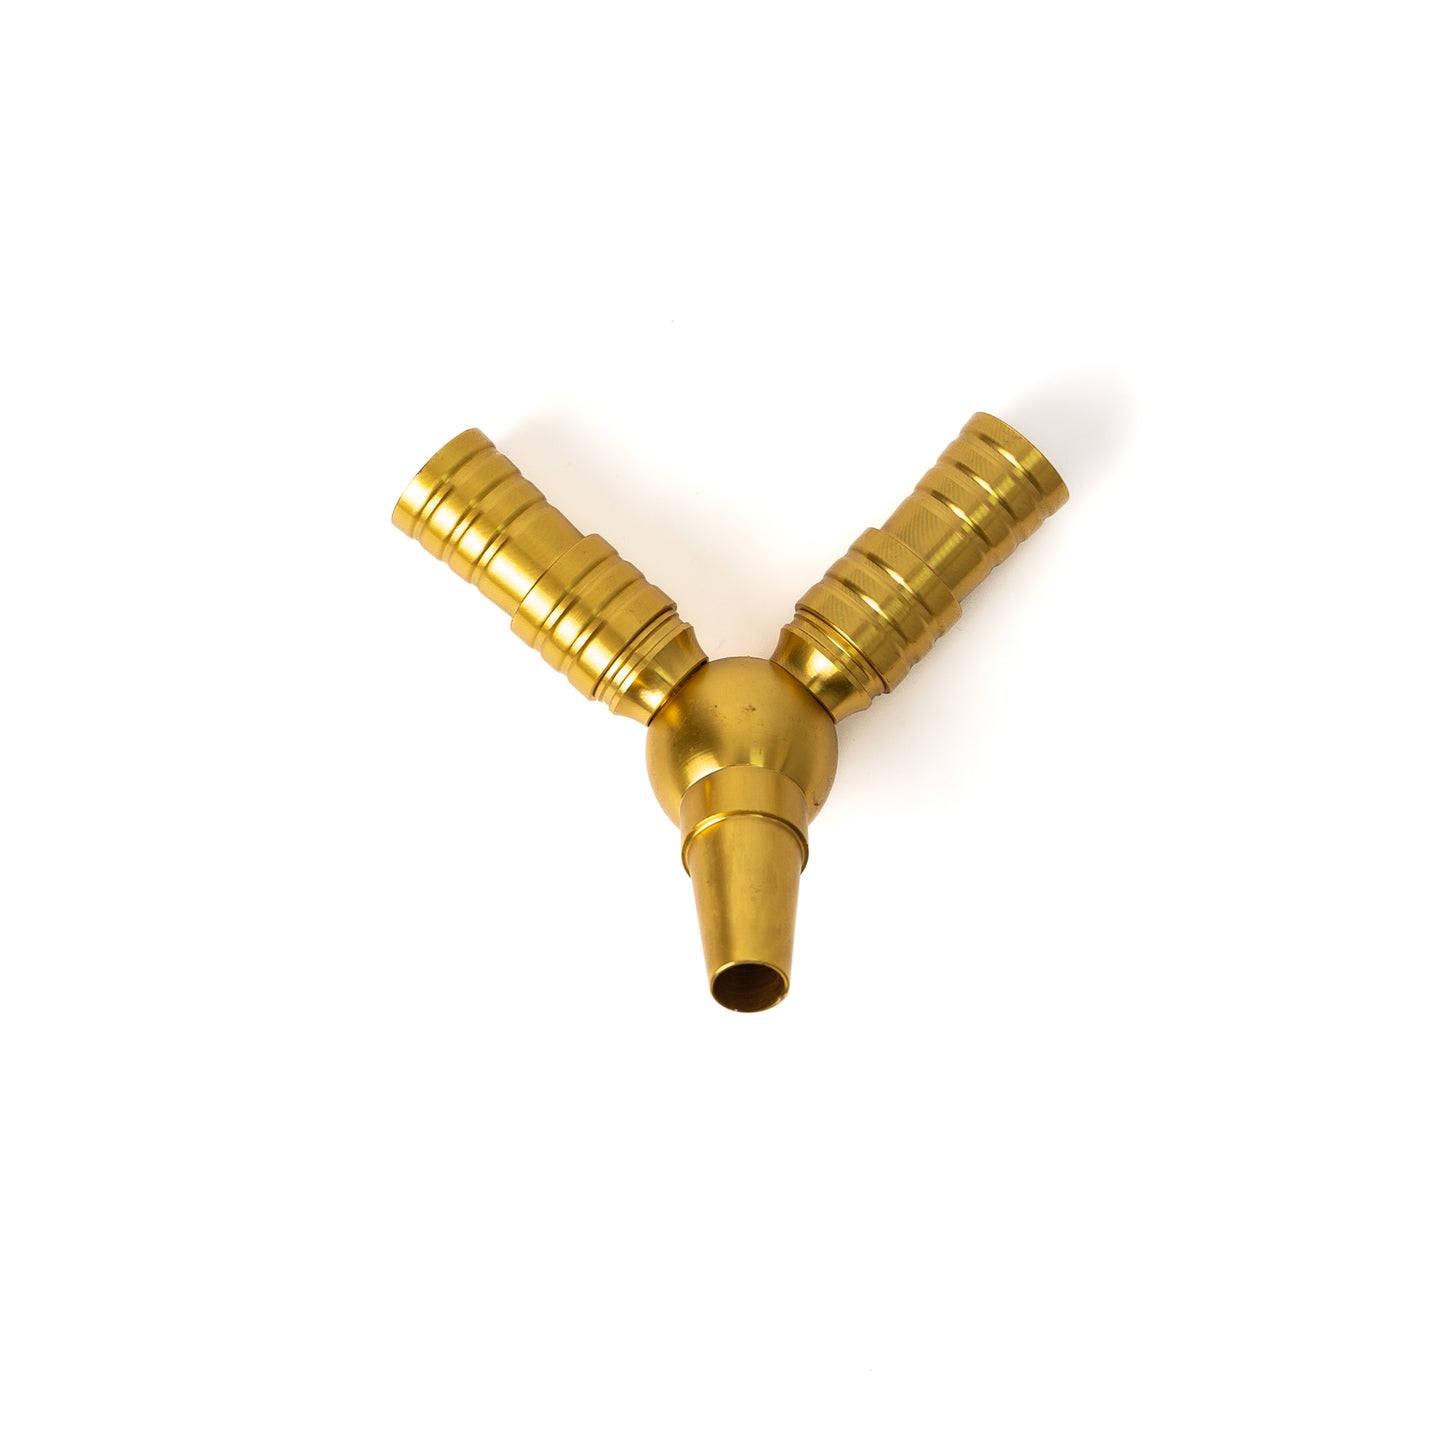 Dual Pipe Extension (Connector) for Hookah Pipe - Golden